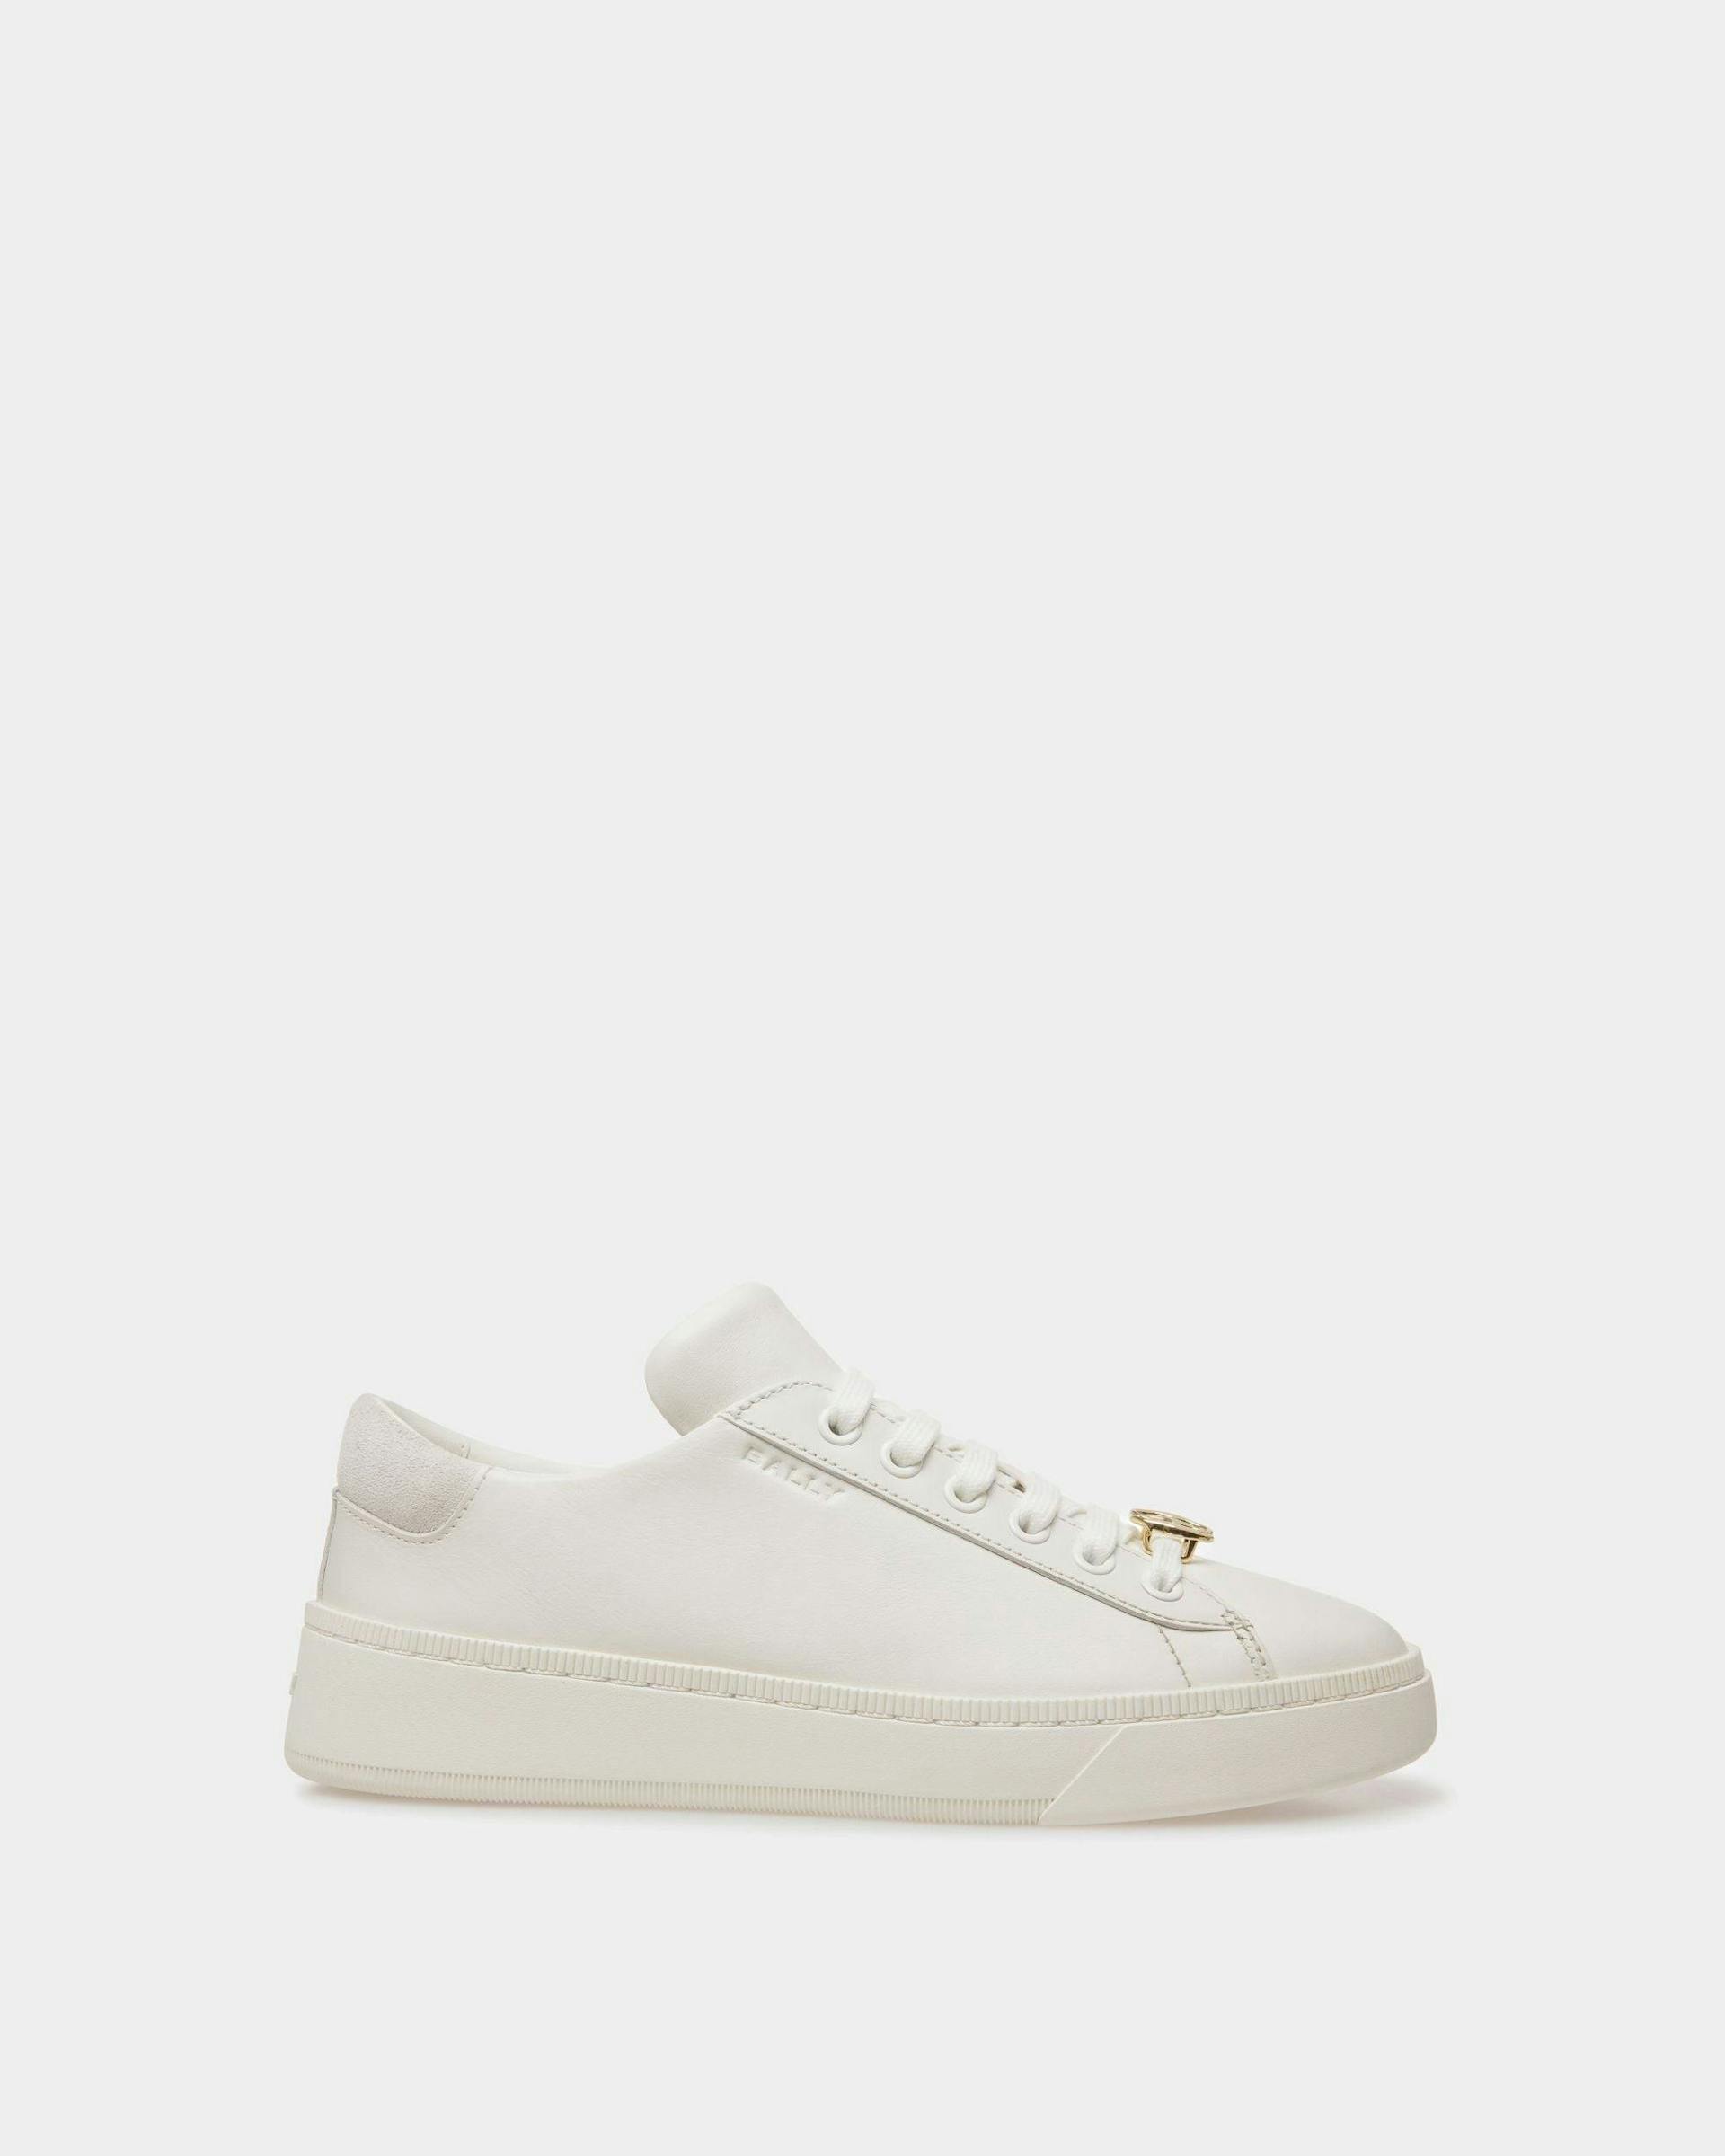 Women's Raise Sneakers In White Leather | Bally